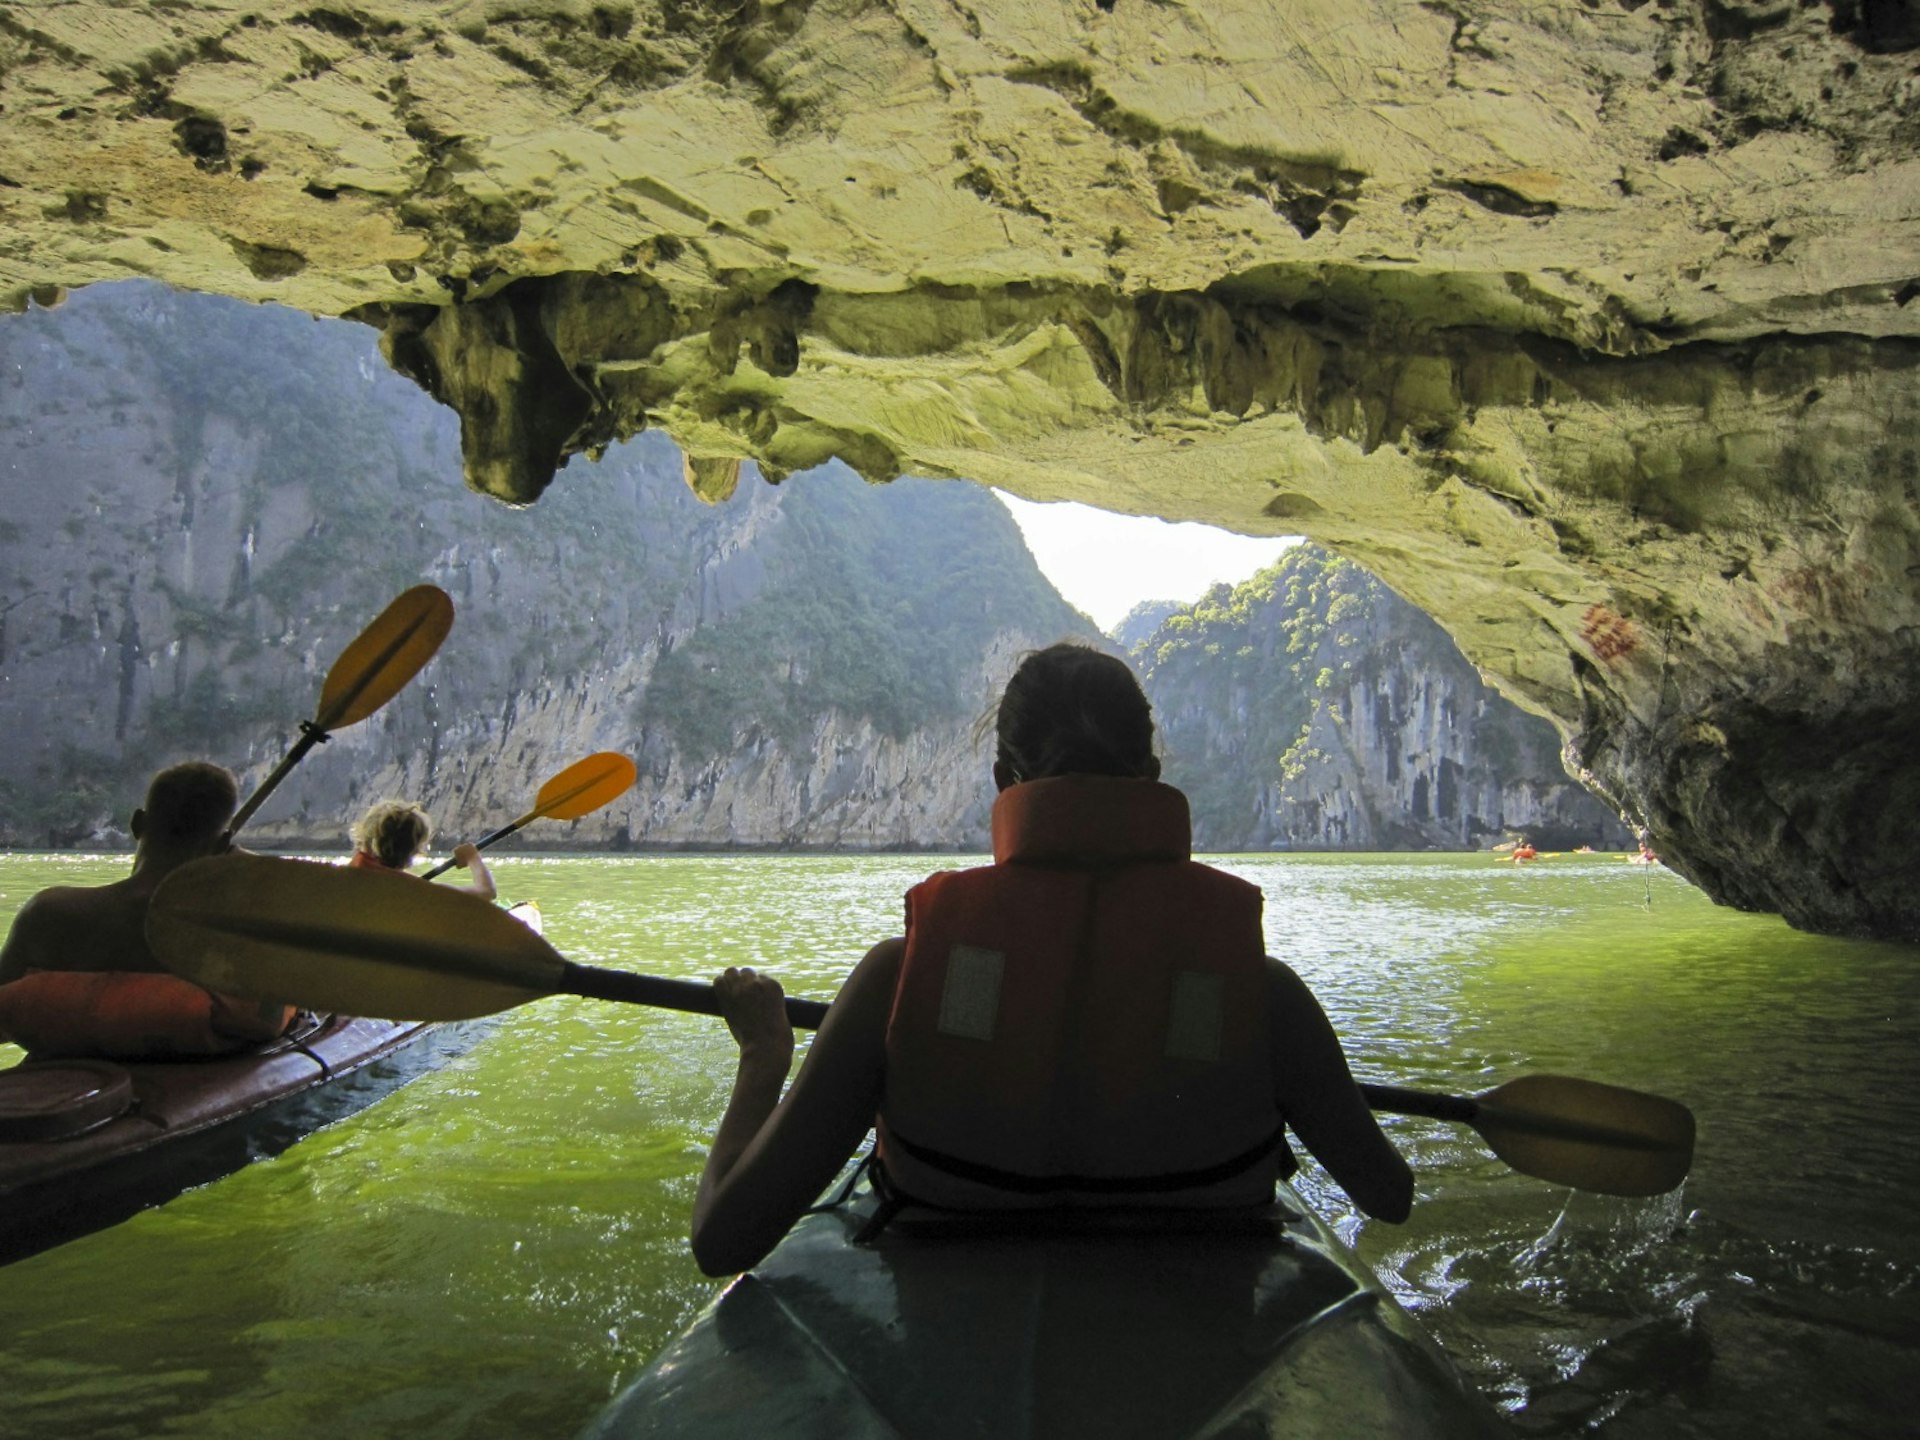 A group of kayakers (equipped with life jackets and paddles) make their way through a dimly lite cave in Halong Bay